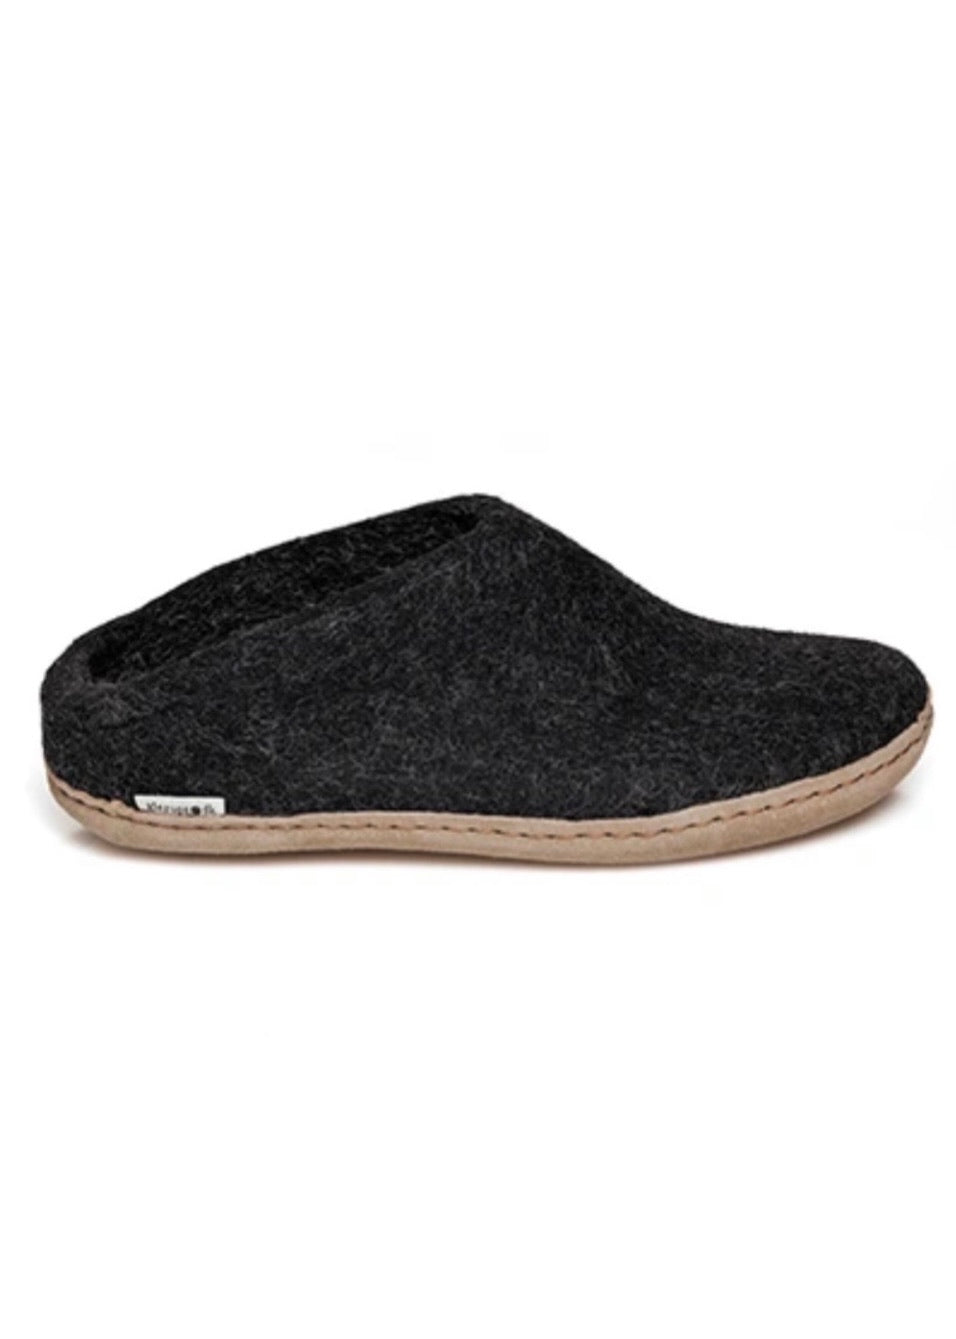 Slip On Slippers - Charcoal Grey